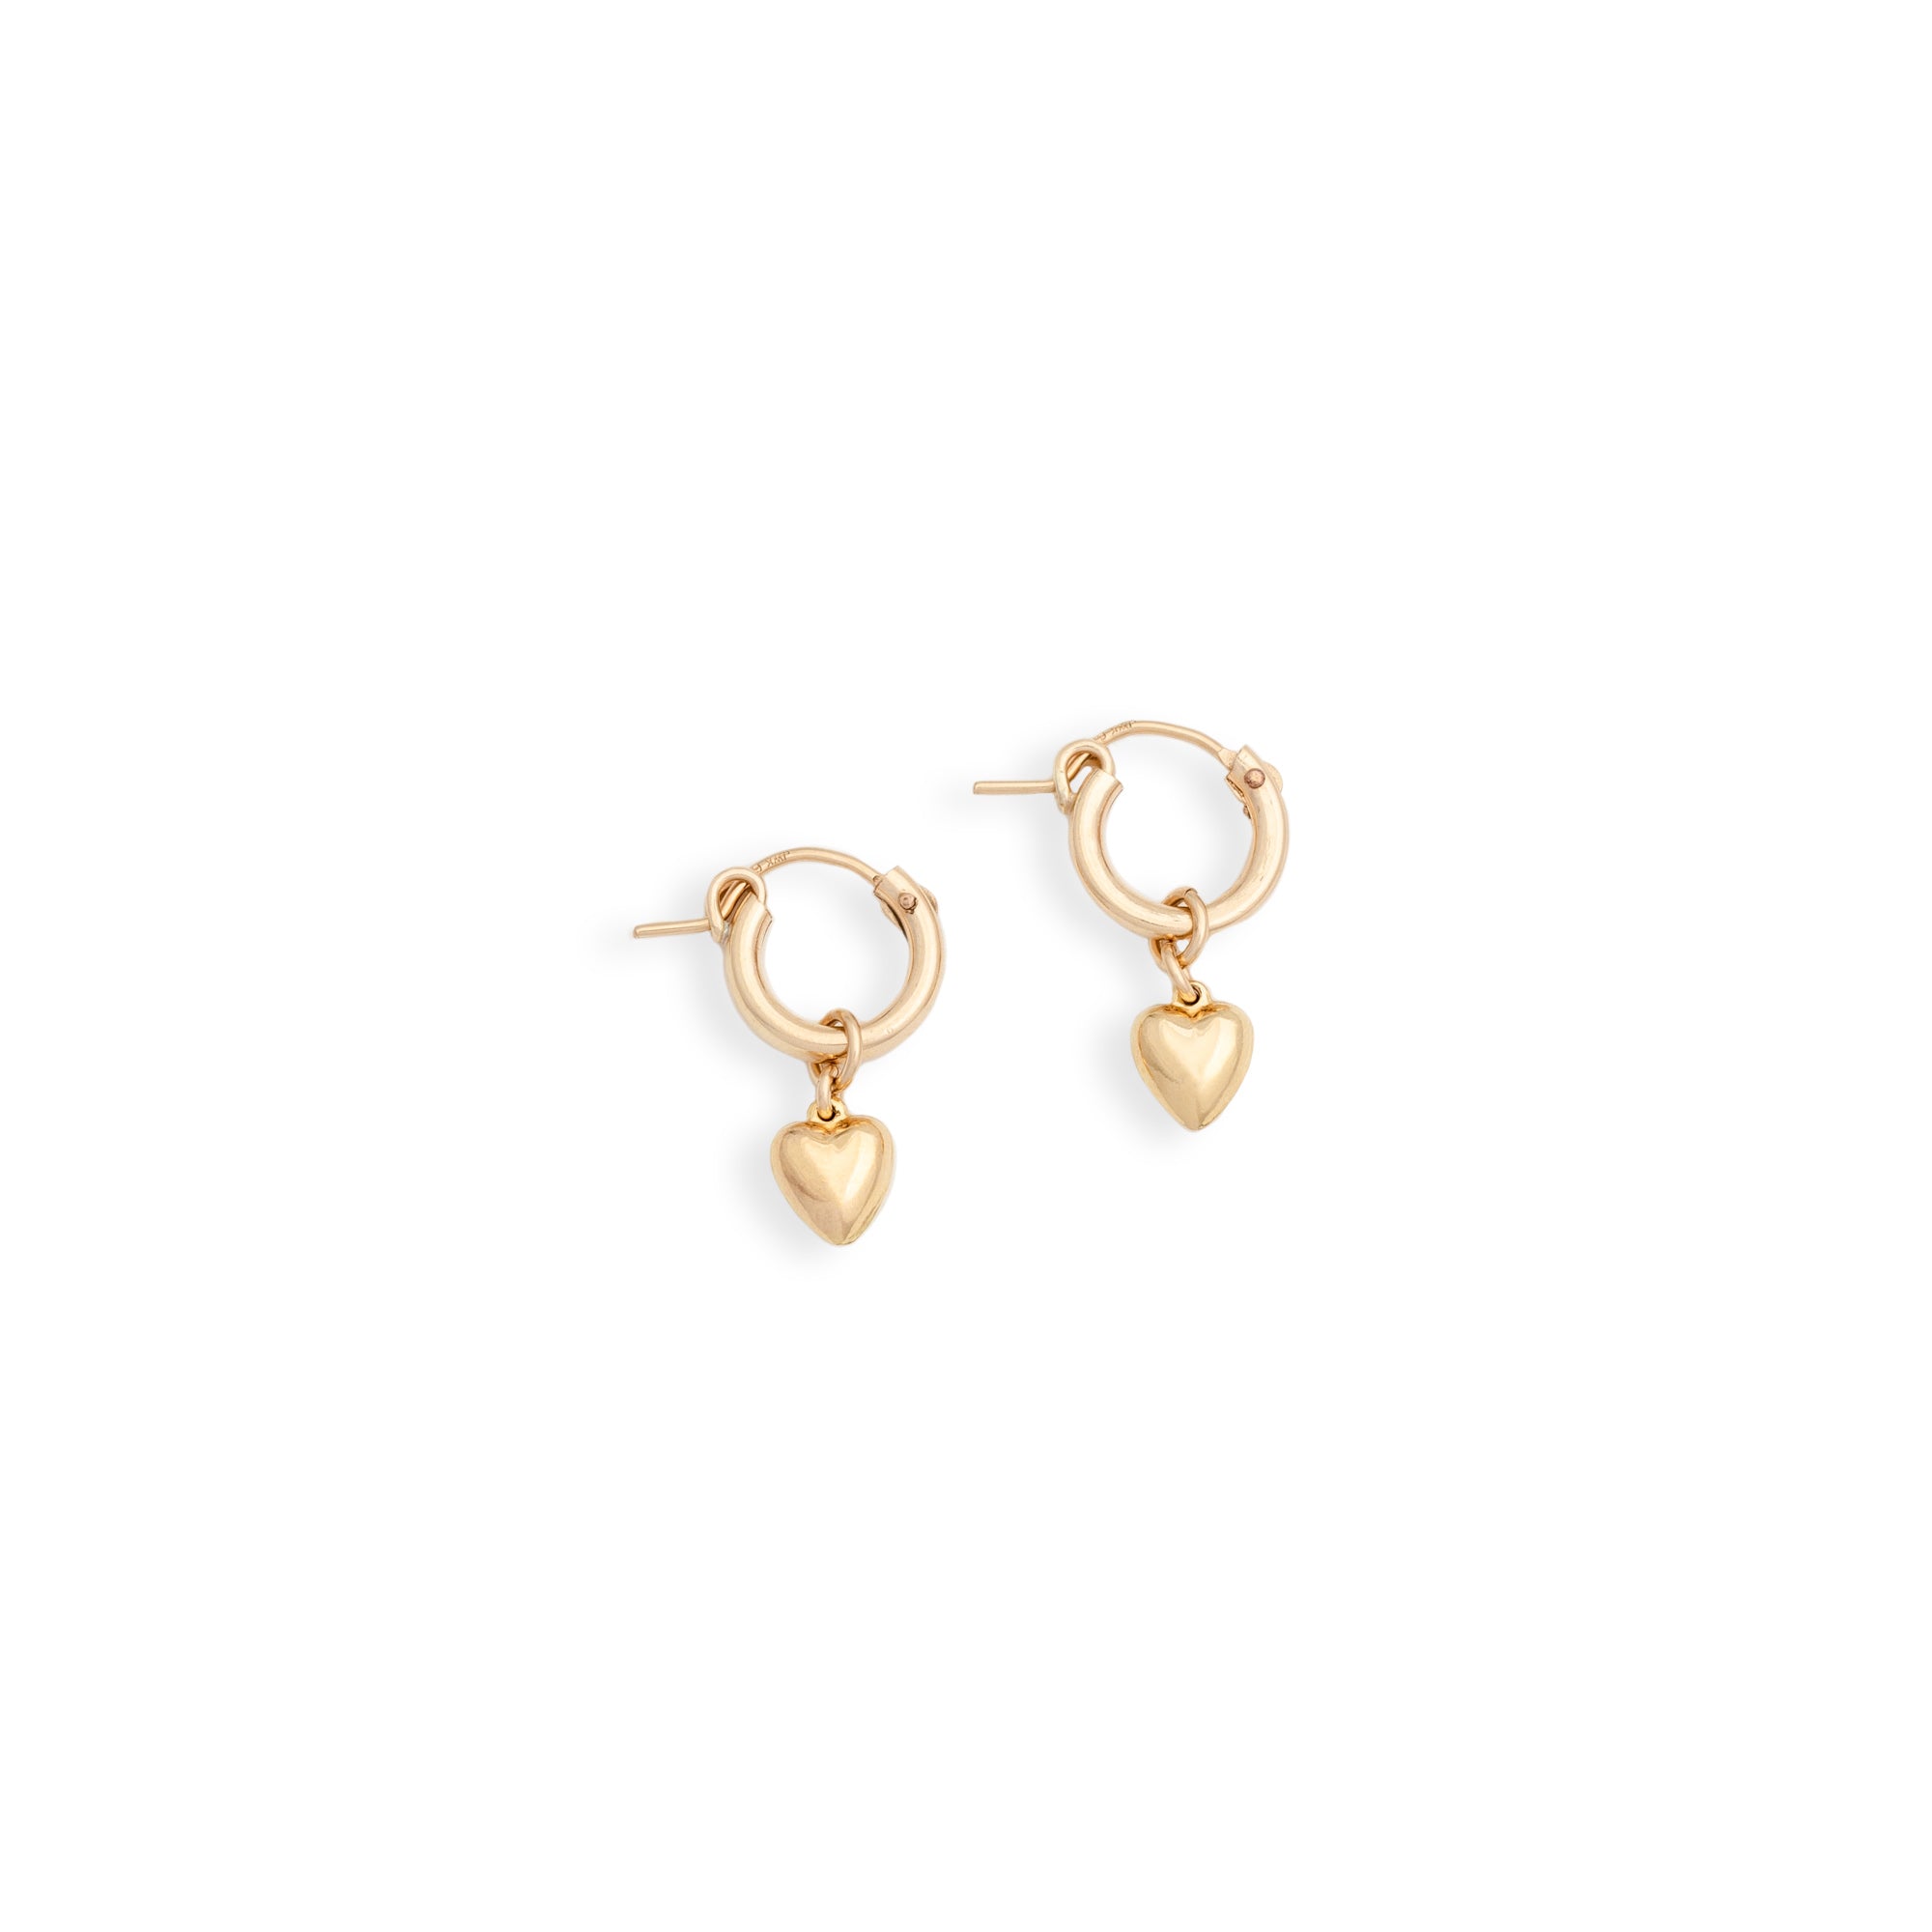 Sweetheart Hoops - Goldie Collection: Hanna Montazami x Erin Fader Jewelry